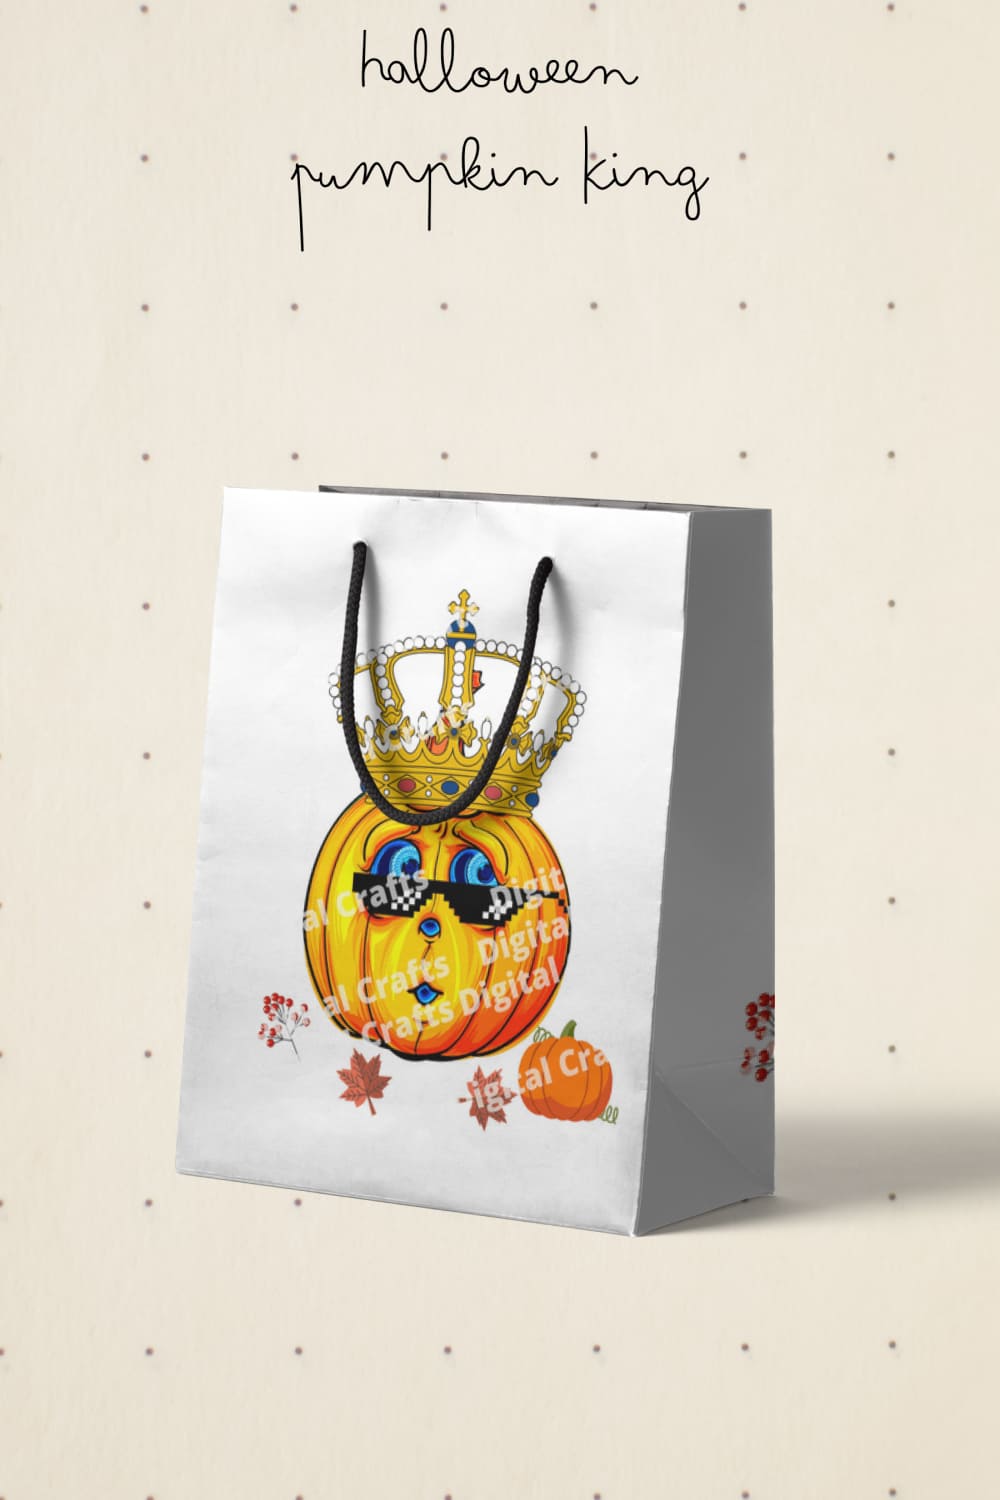 Image of paper bag with adorable king pumpkin print.